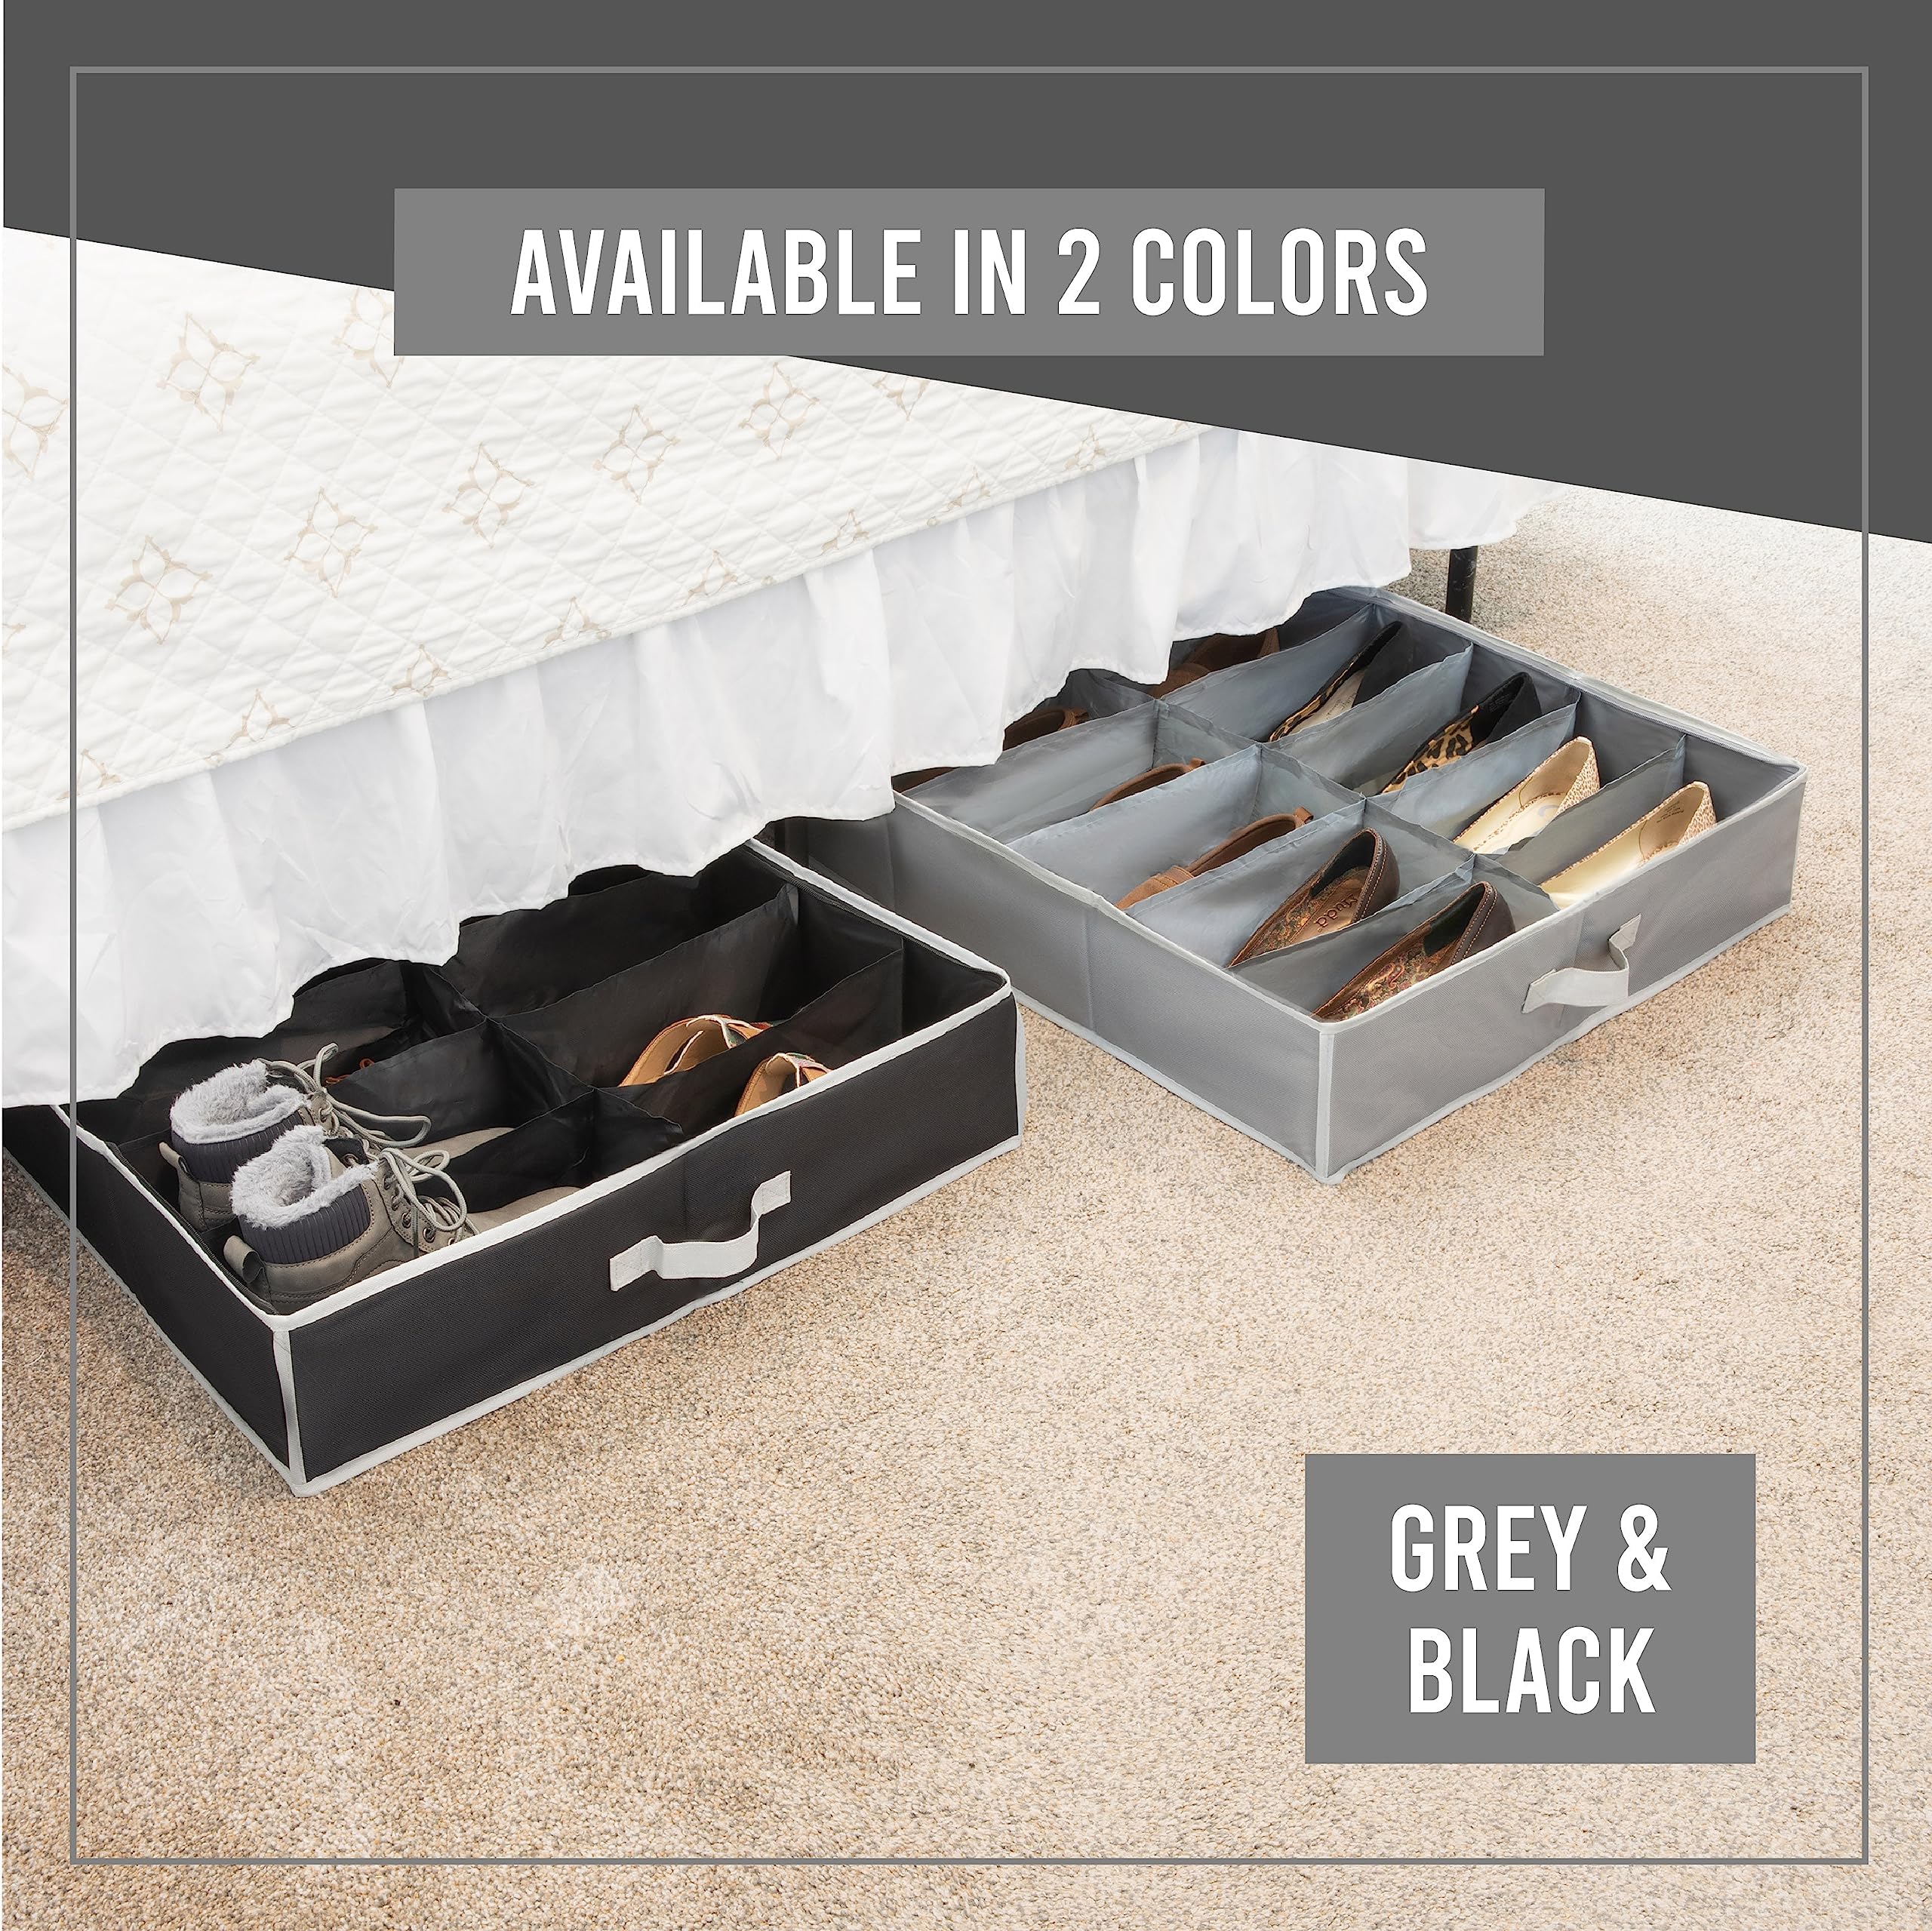 Under Bed Shoe Storage Organizer - TEAR-RESISTANT Heavy Duty 600D Material - Fits All Styles Men's and Women's Shoes, Up to 16 Pairs - Extra-Strong Zipper - Grey - Perfect for College Dorms  - Like New